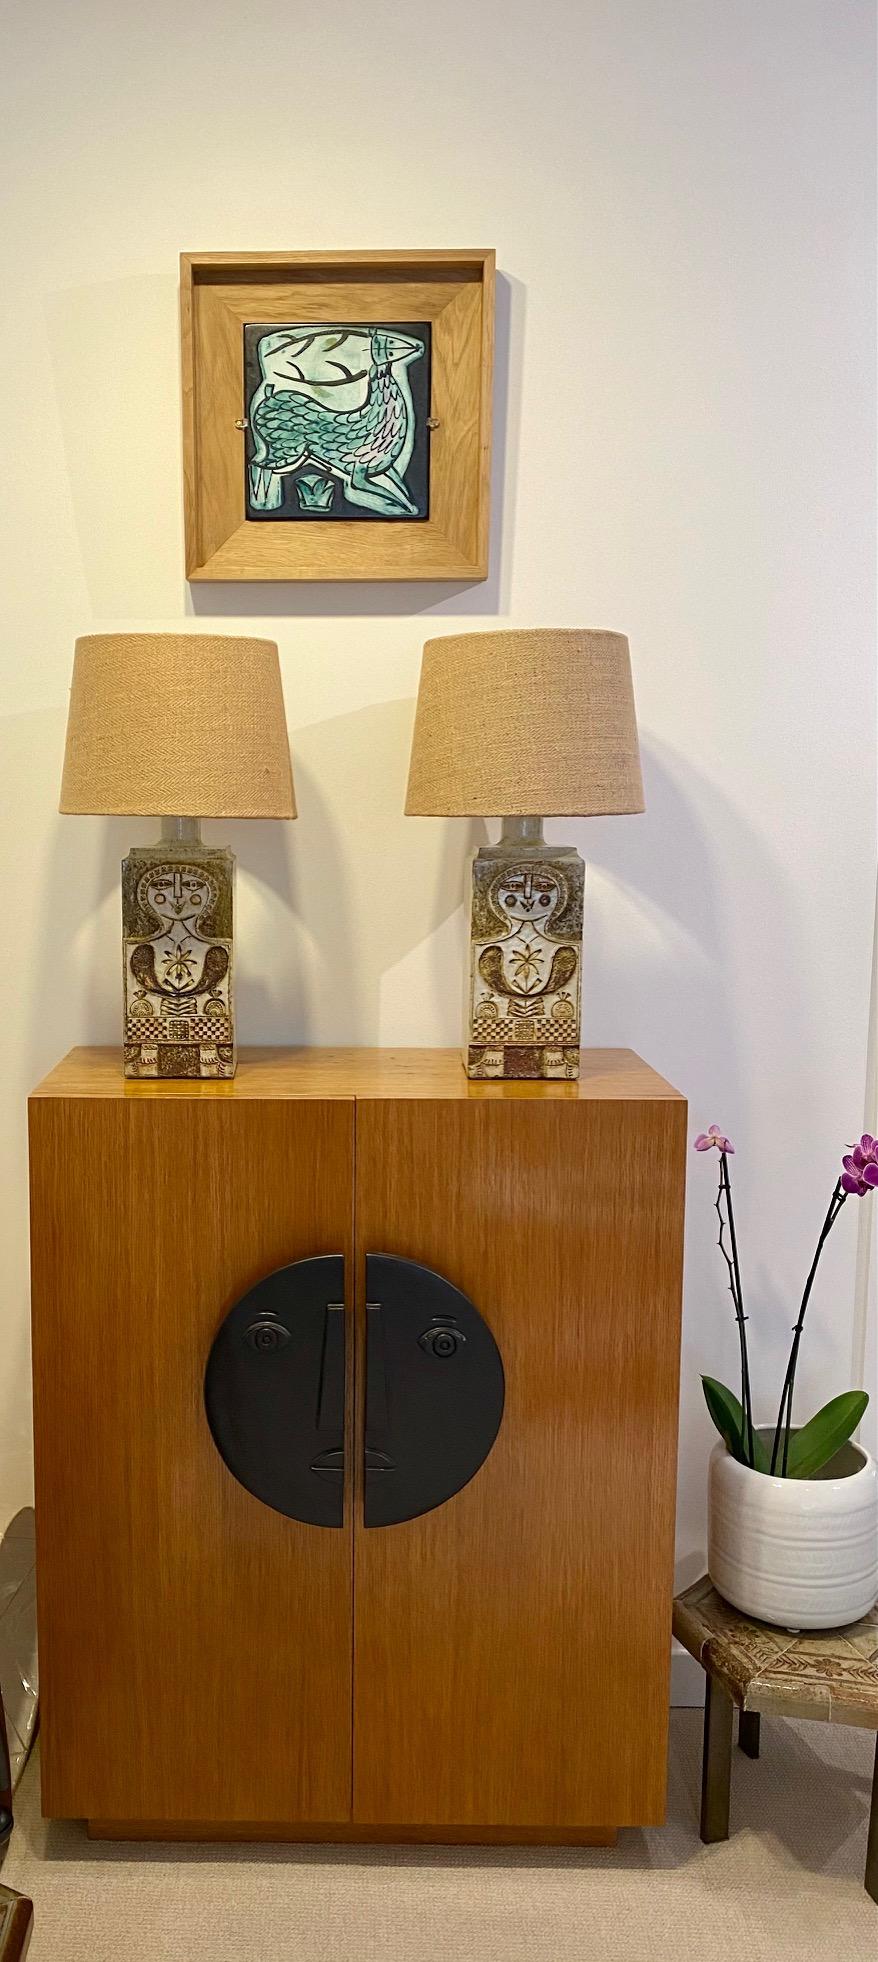 Mid-20th Century Roger Capron Pair of Ceramic Lamps Vallauris France, 1960s For Sale